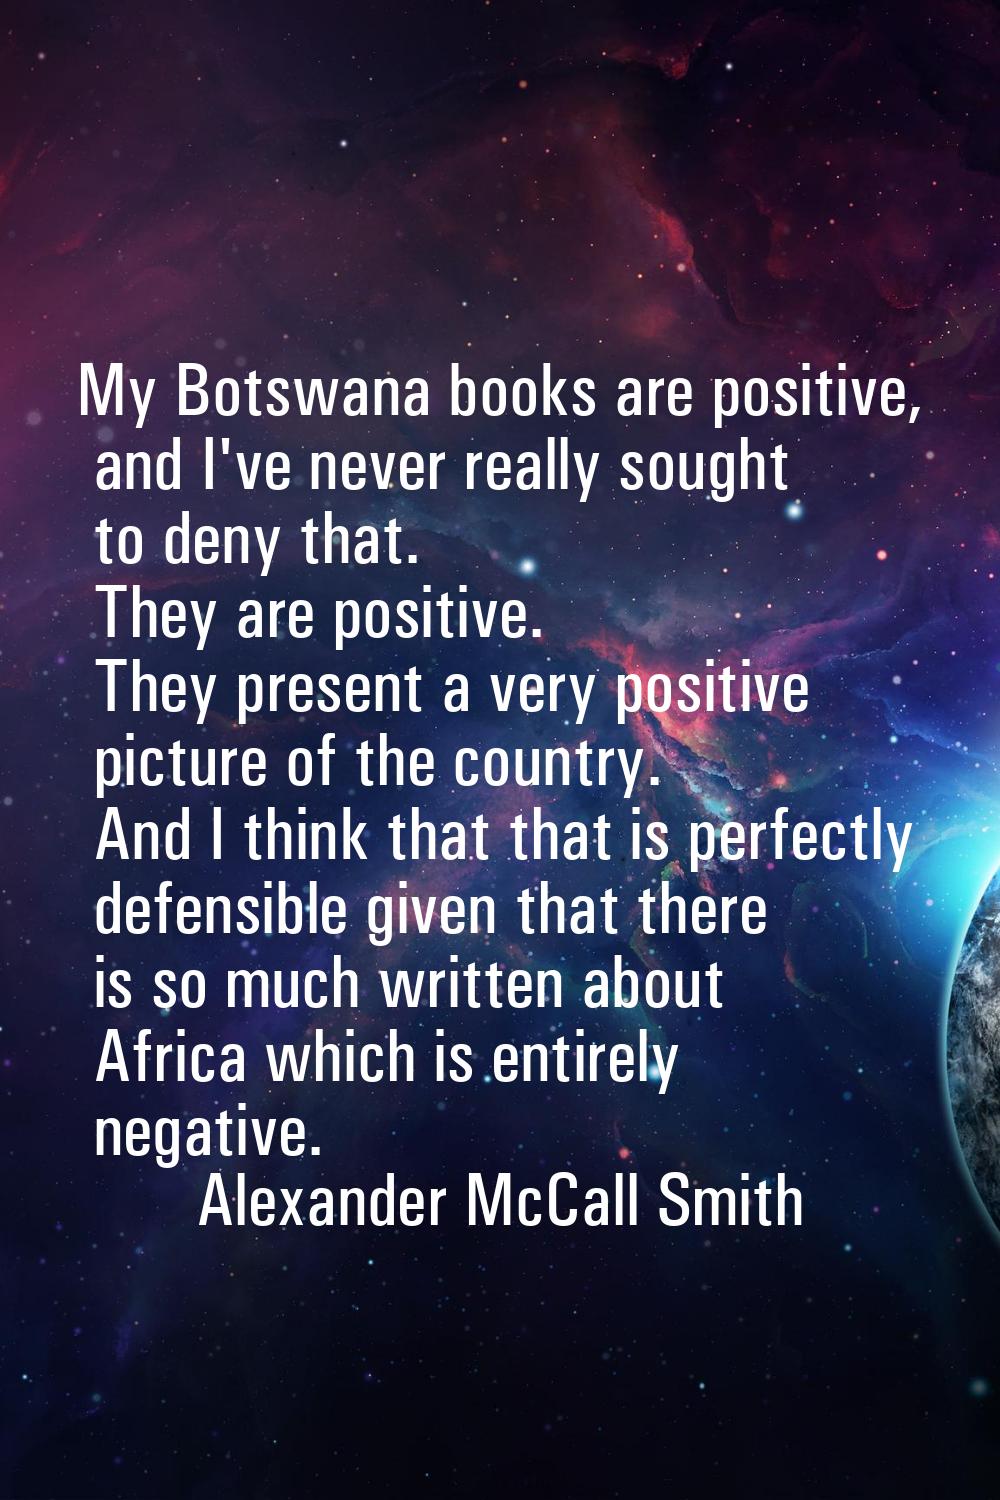 My Botswana books are positive, and I've never really sought to deny that. They are positive. They 